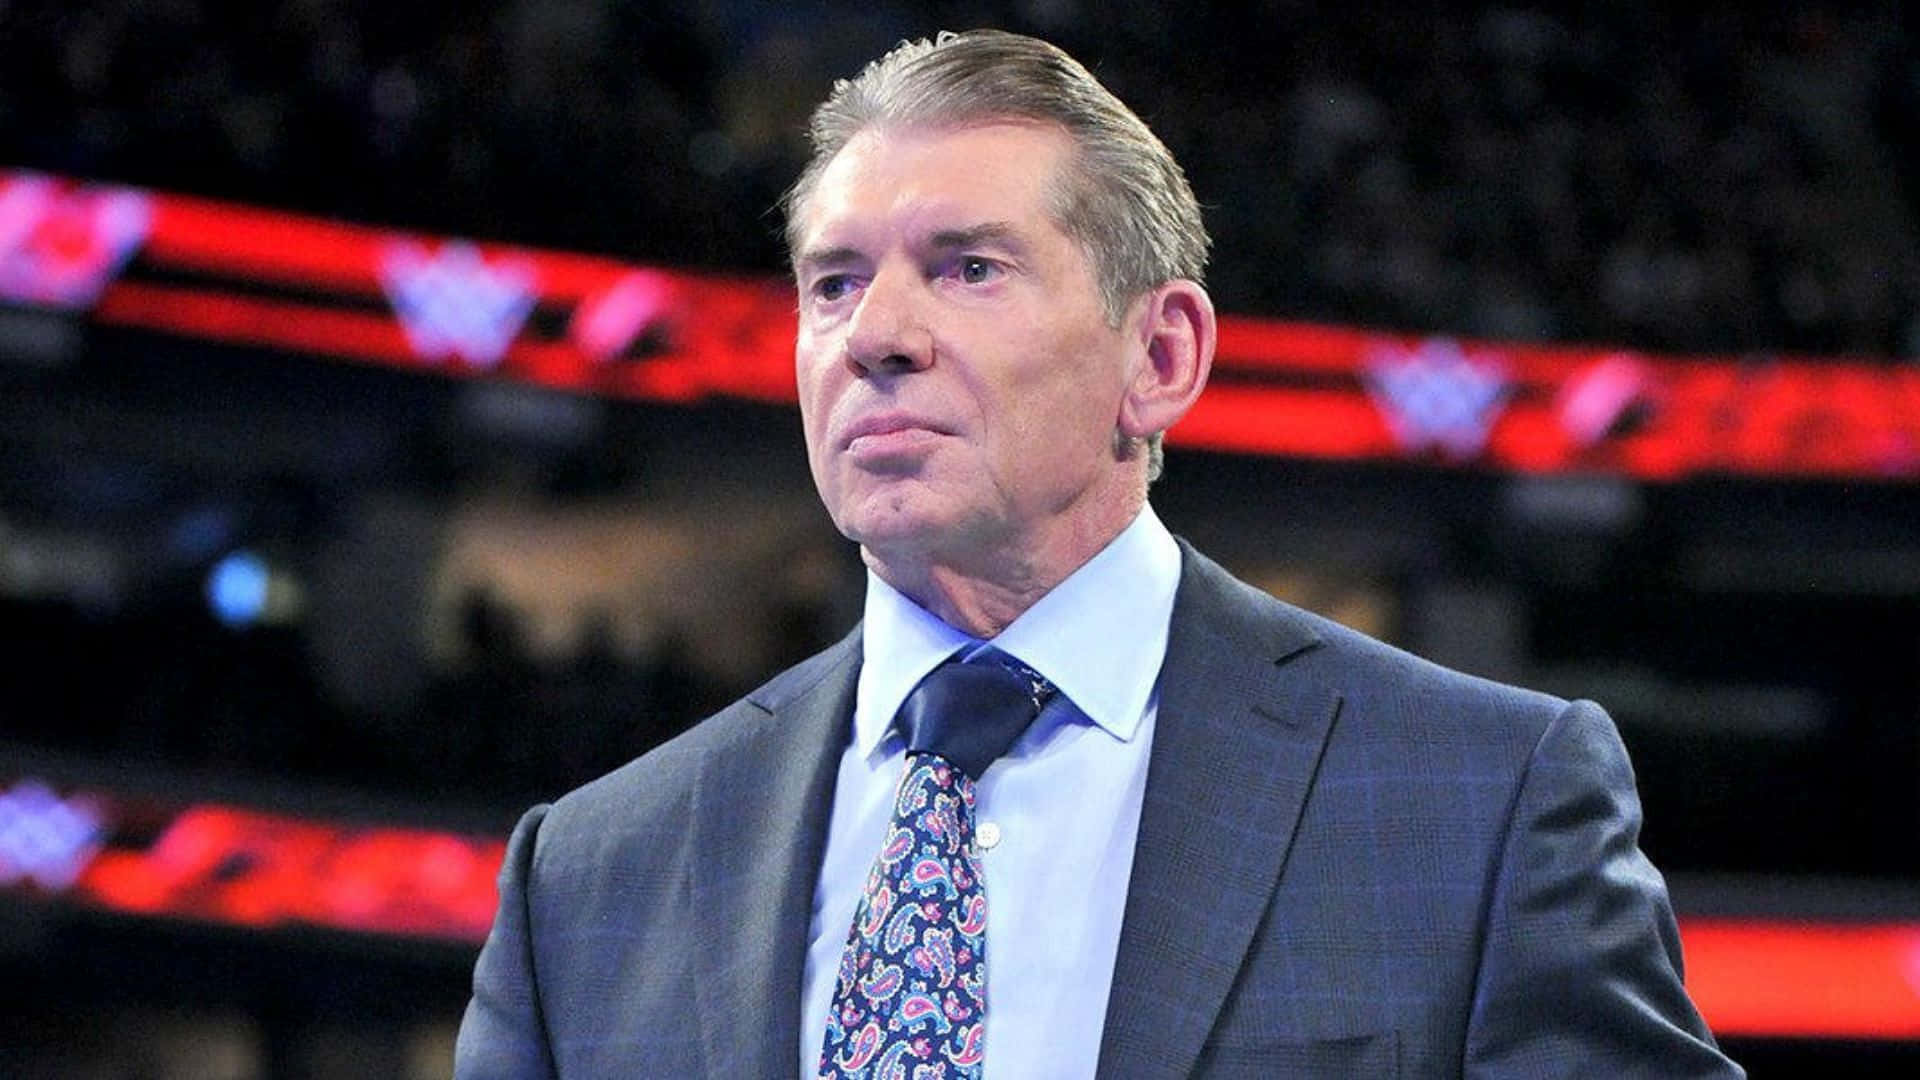 WWE Commentator Vince McMahon Inside The Ring Wallpaper